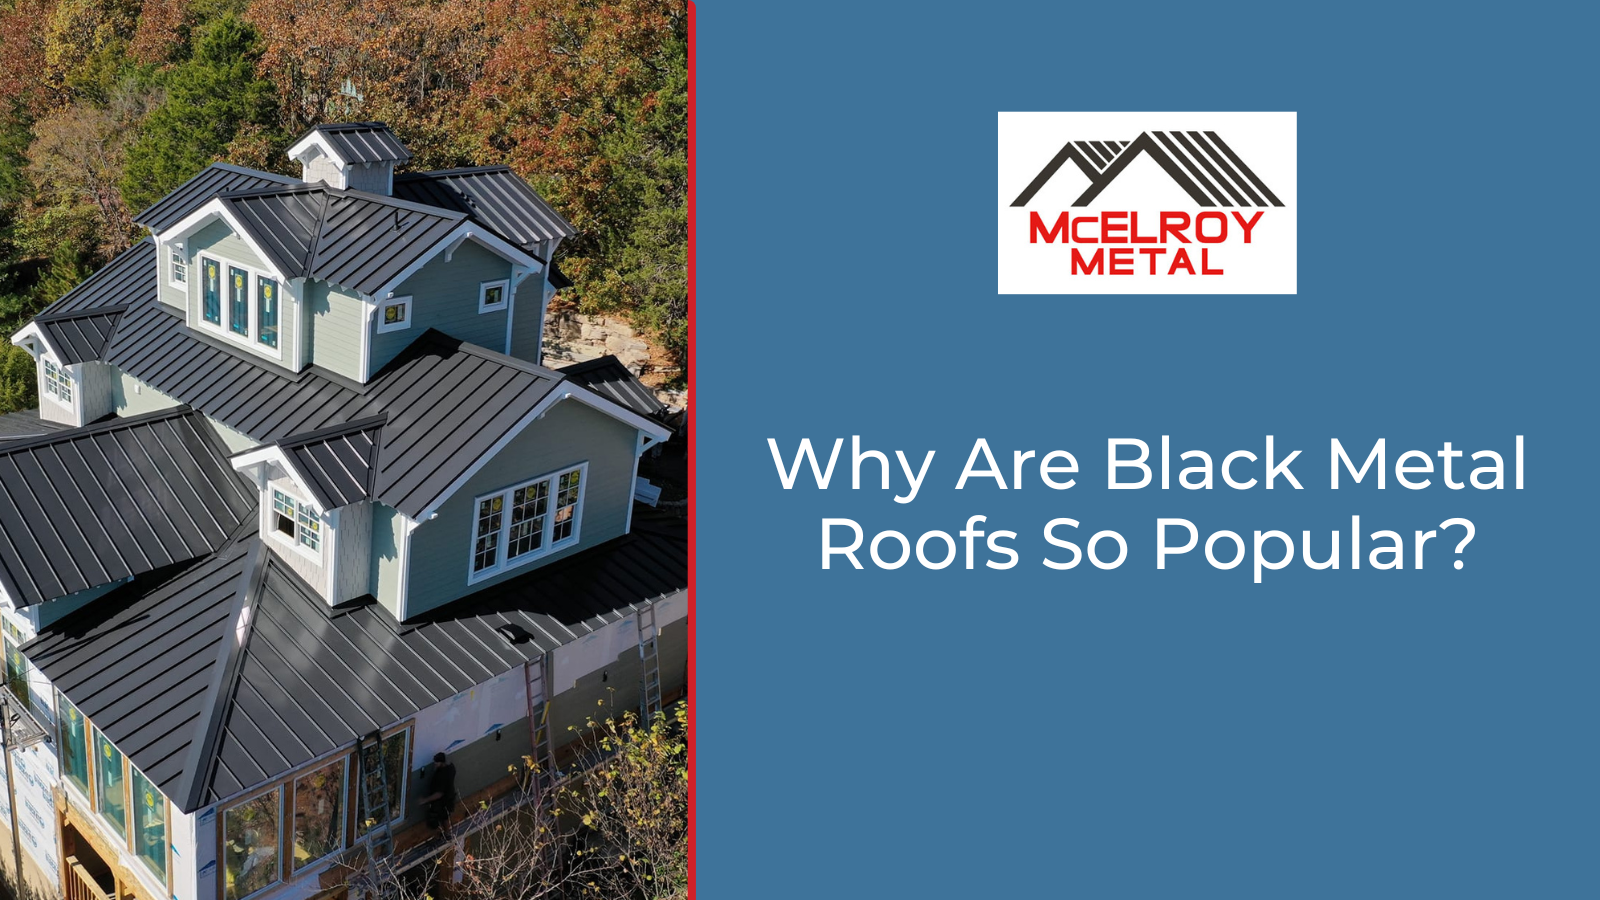 Why Are Black Metal Roofs So Popular?